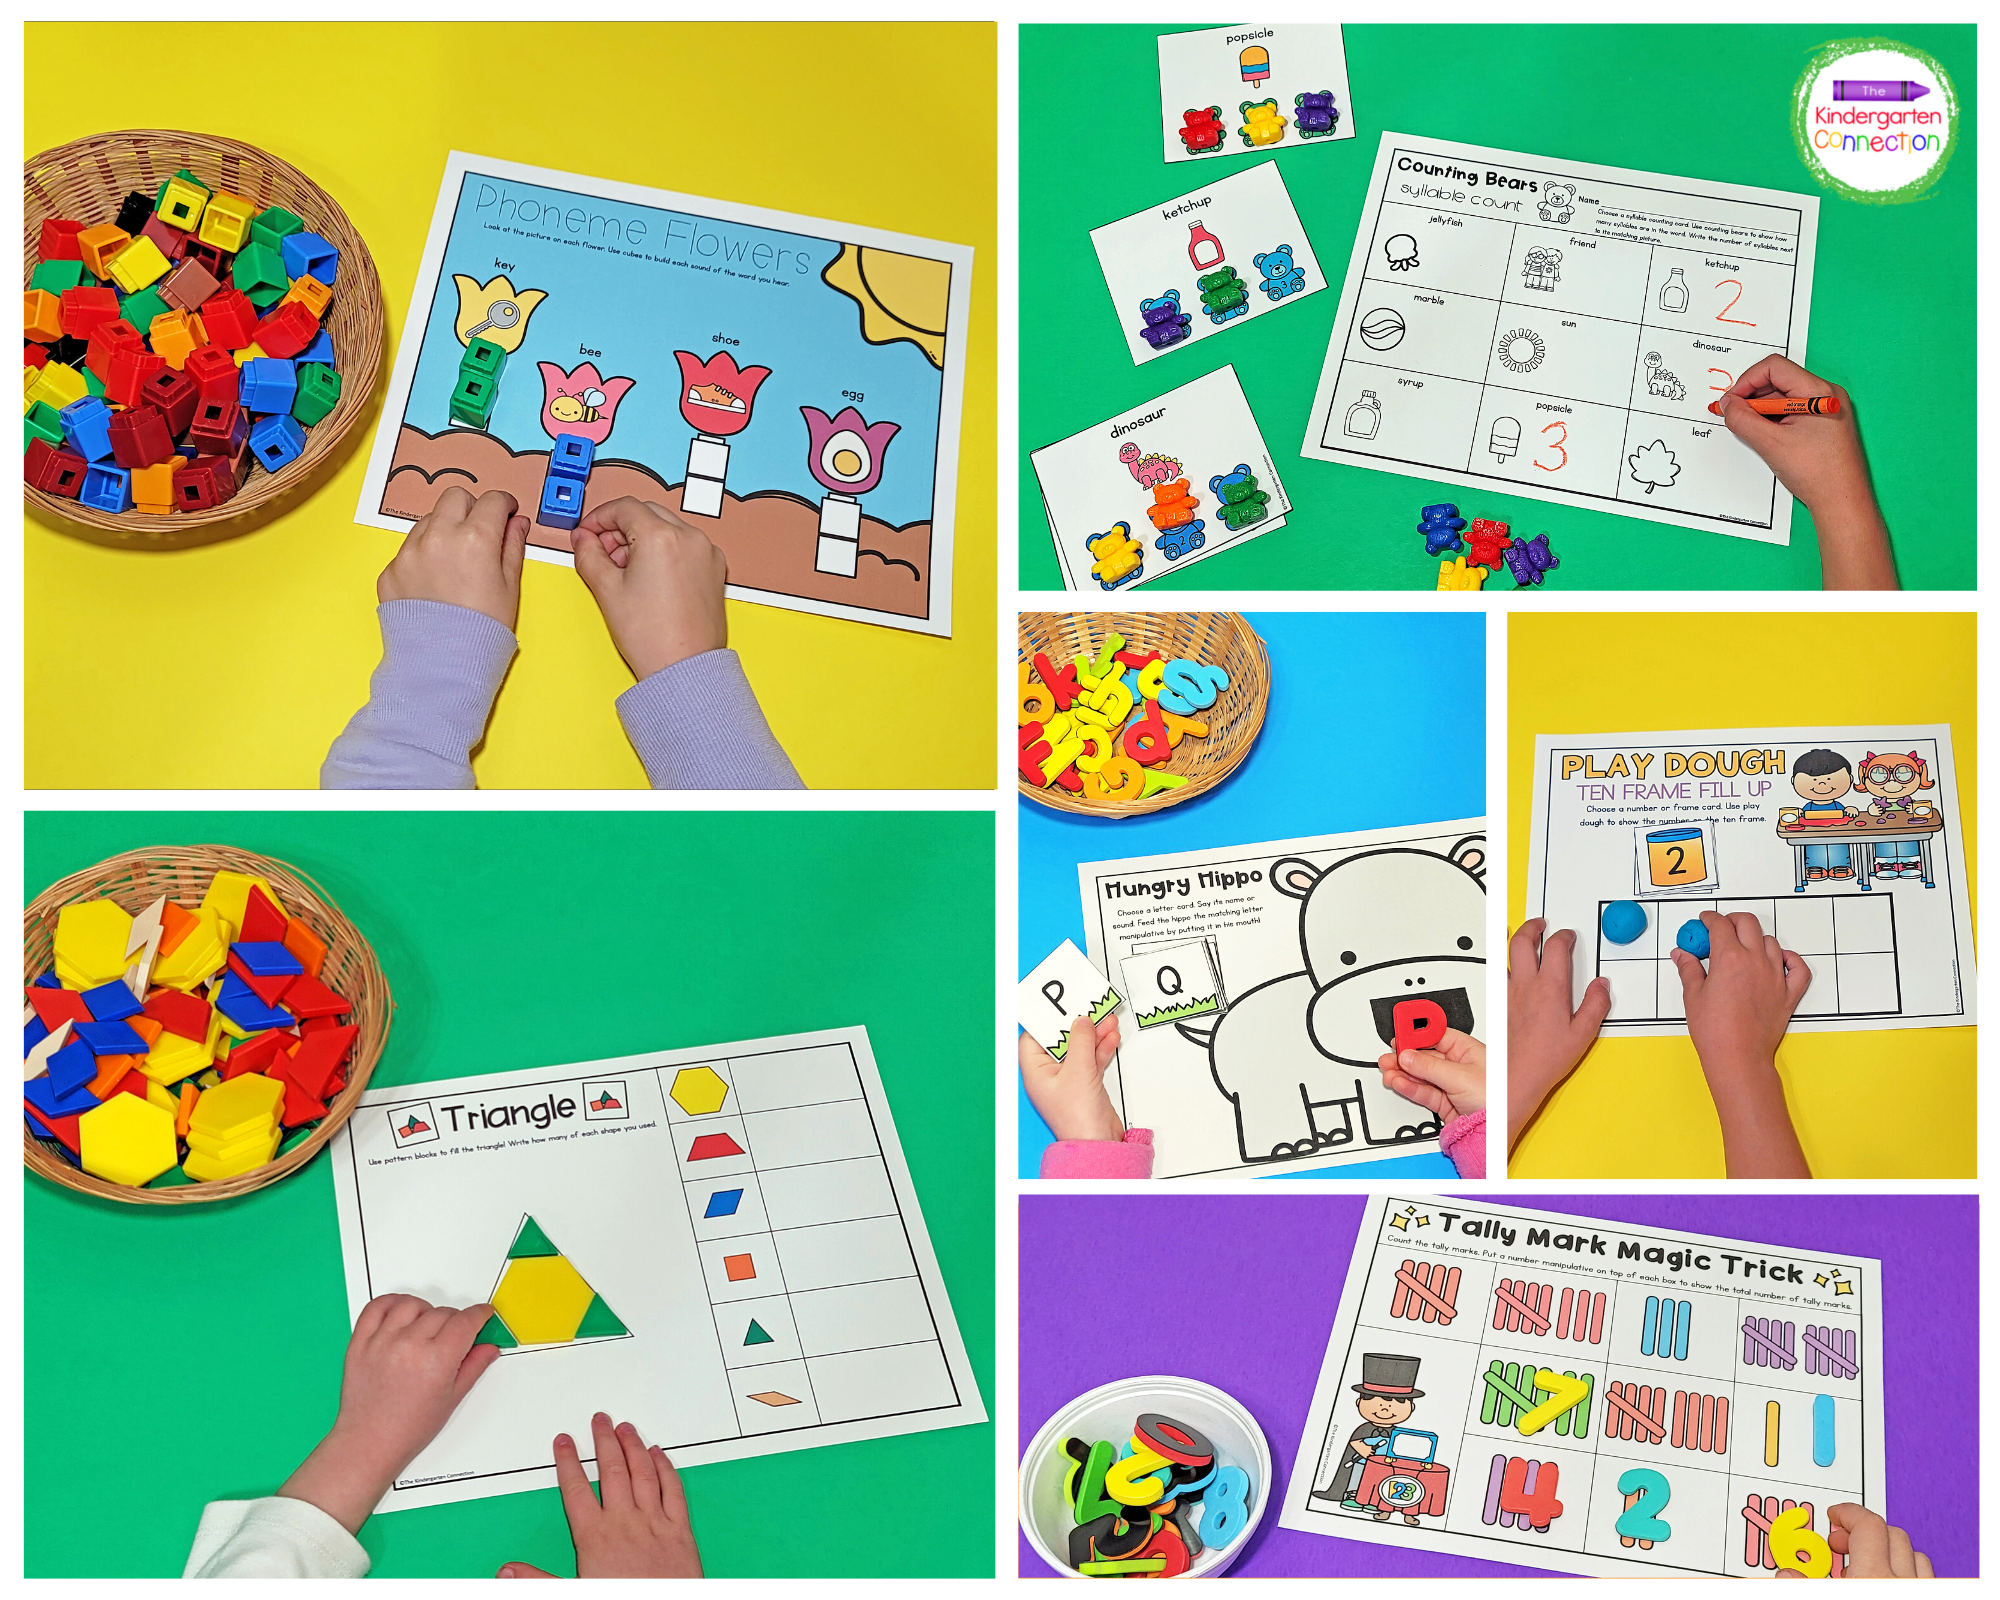 These manipulatives activities are designed for use with counting bears, play dough, pattern blocks, cubes, letters, numbers, and more!